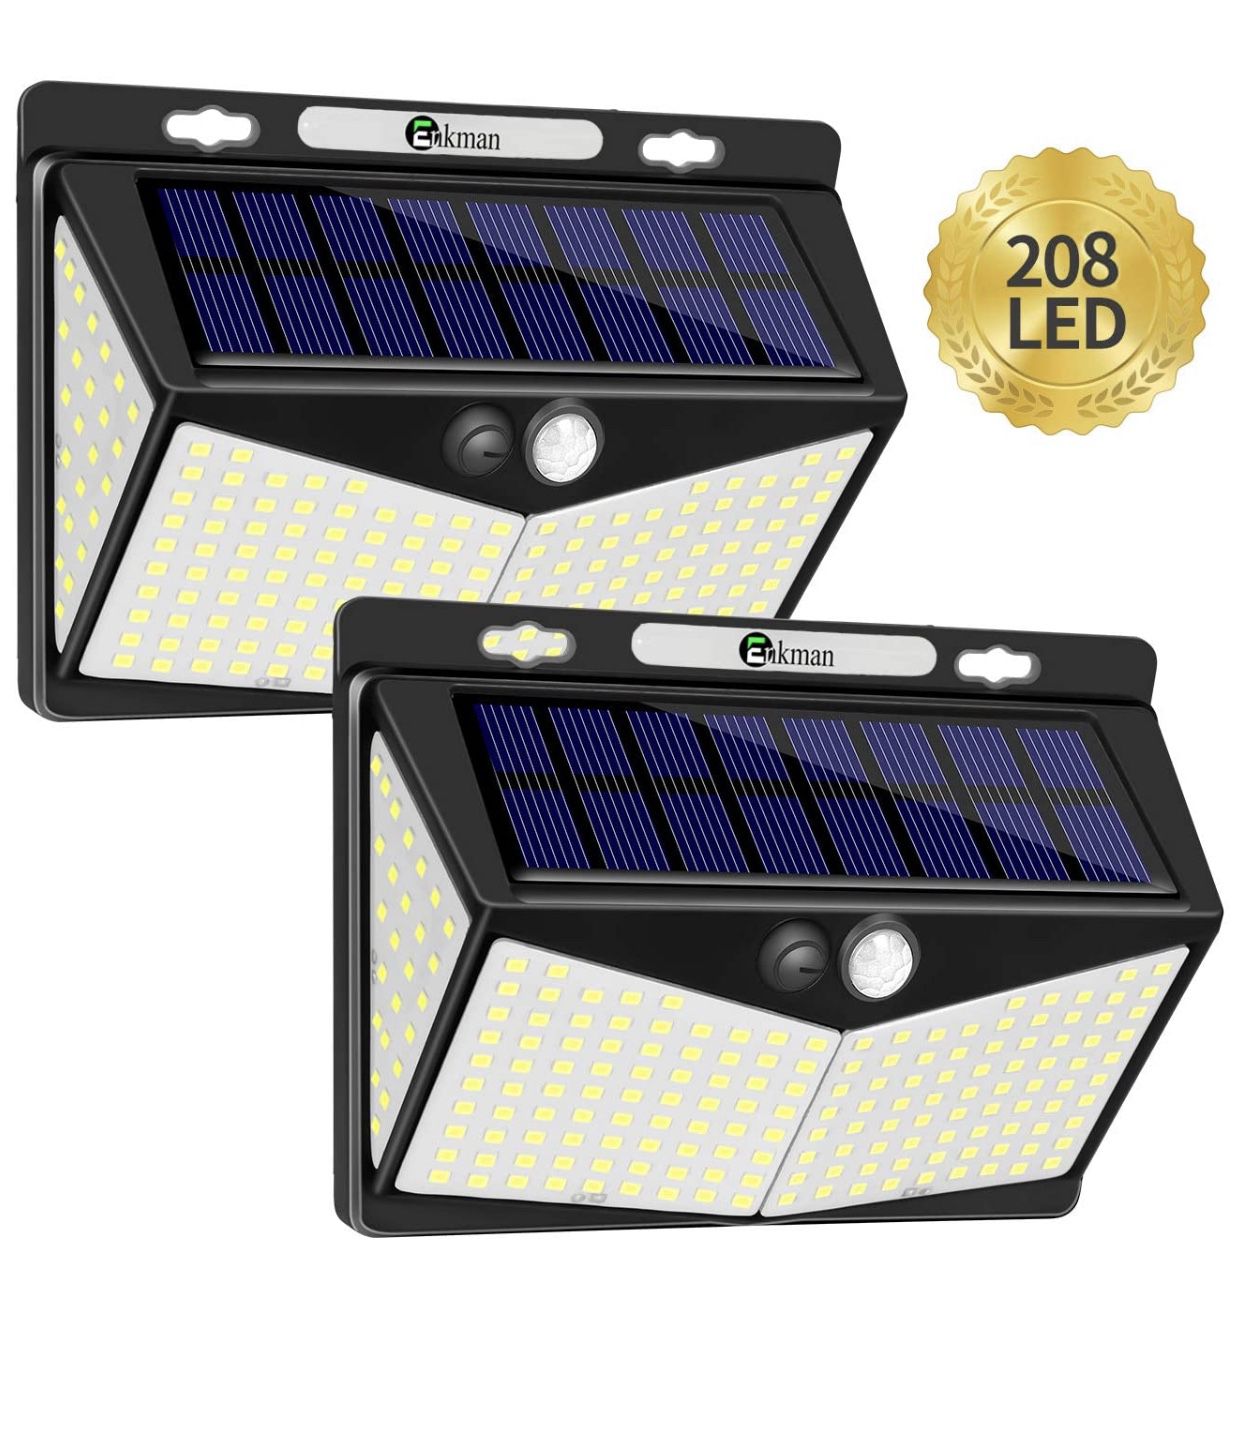 Solar Lights Outdoor 208 LED,Wireless Motion Sensor Lights with 270° Wide Angle IP65 Waterproof for Deck Fence Post Door Wall Yard and Garage, Yard,